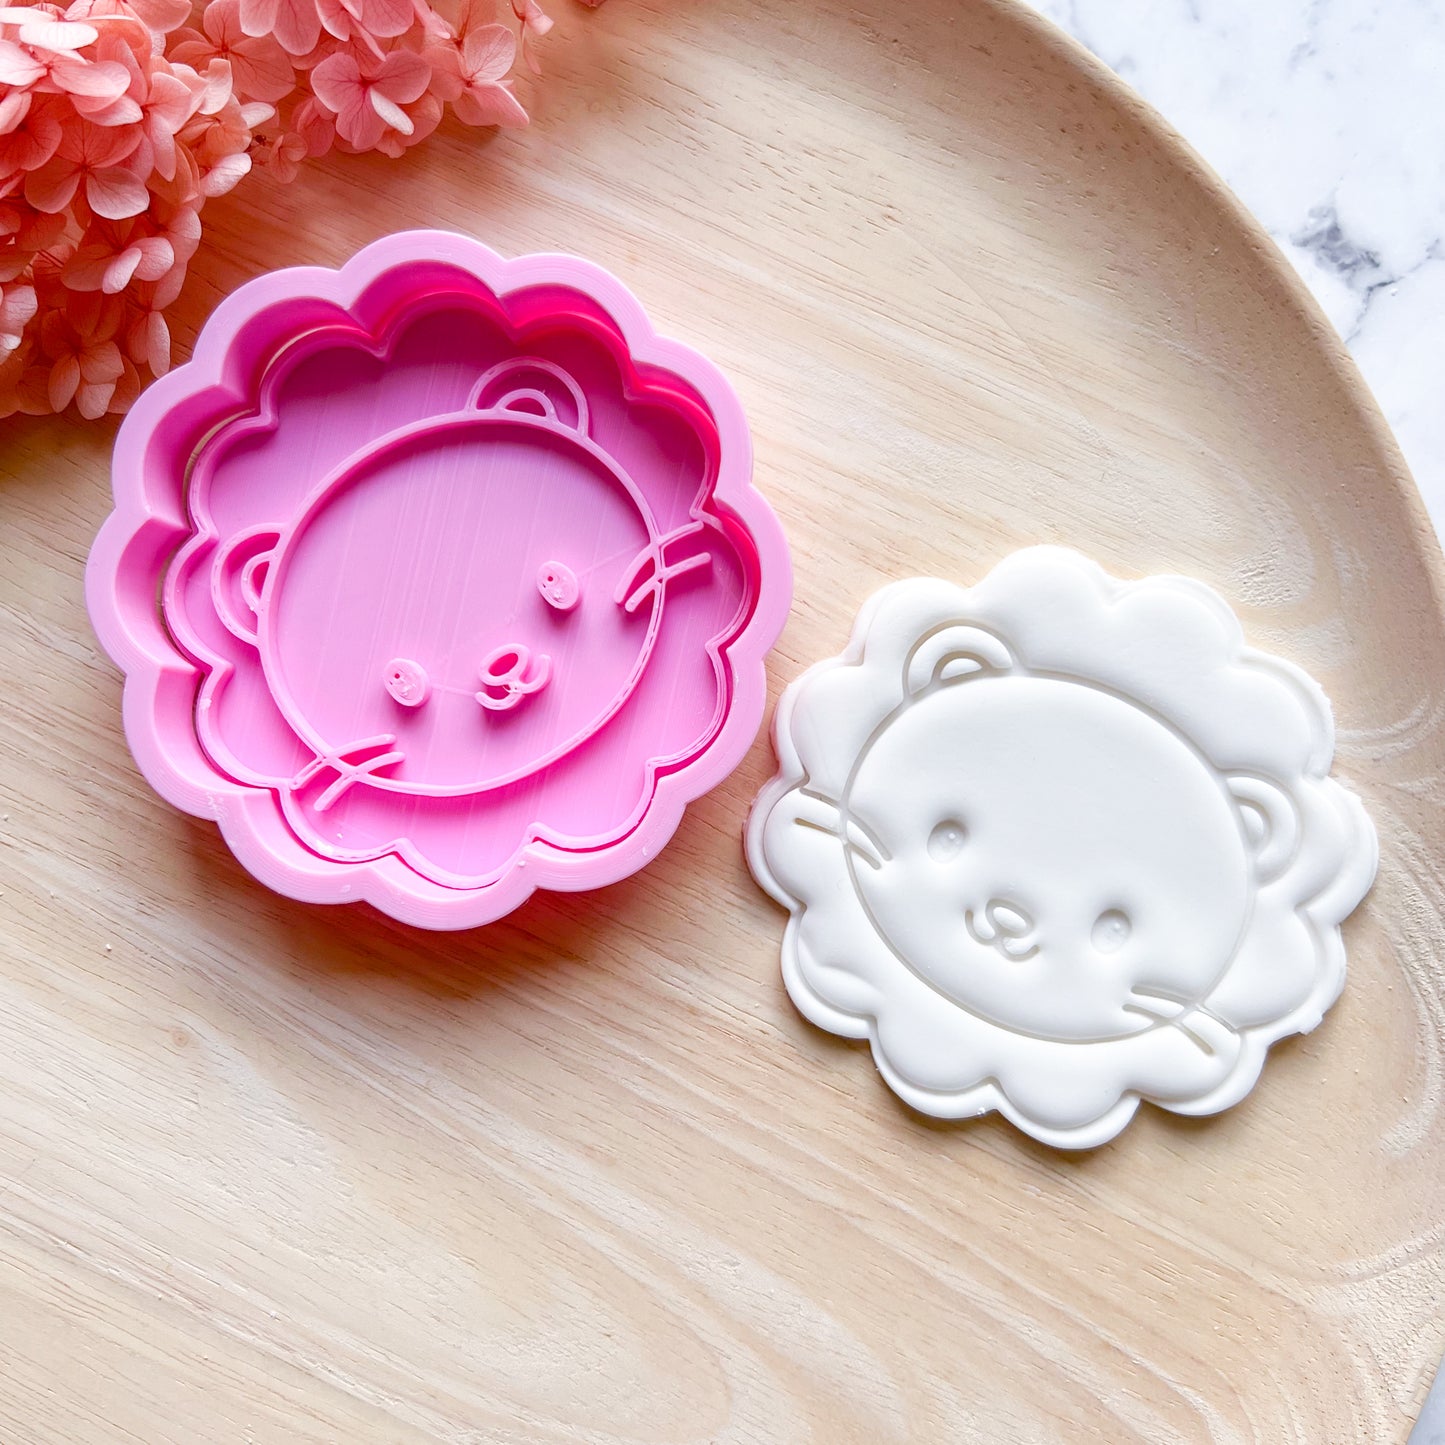 Baby Lion Cookie Cutter & Stamp